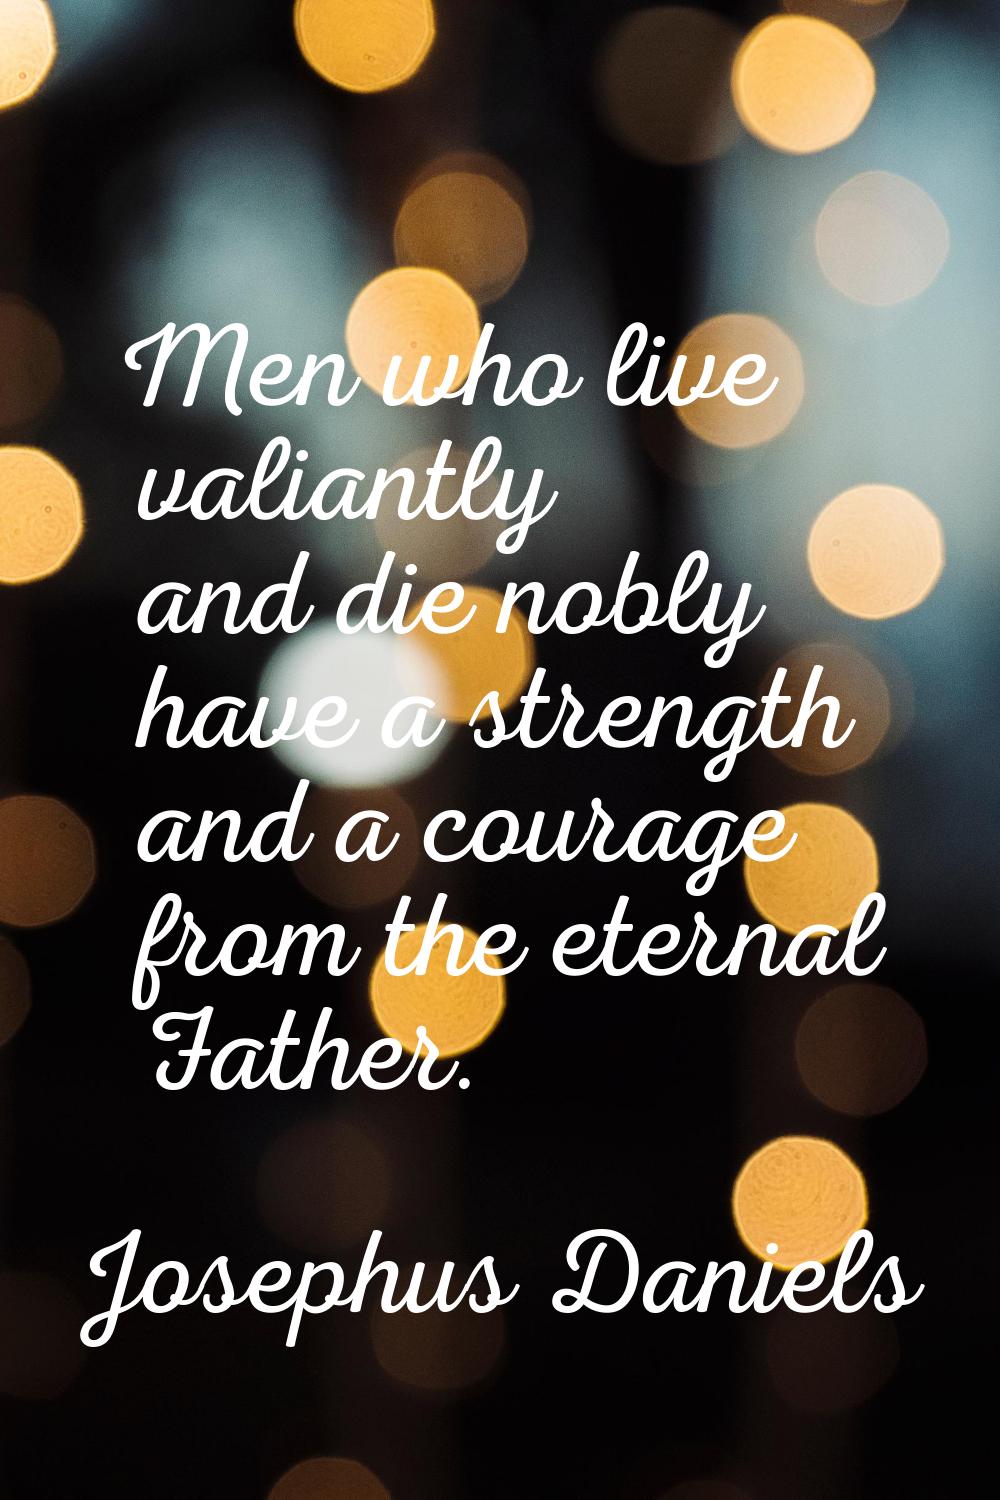 Men who live valiantly and die nobly have a strength and a courage from the eternal Father.